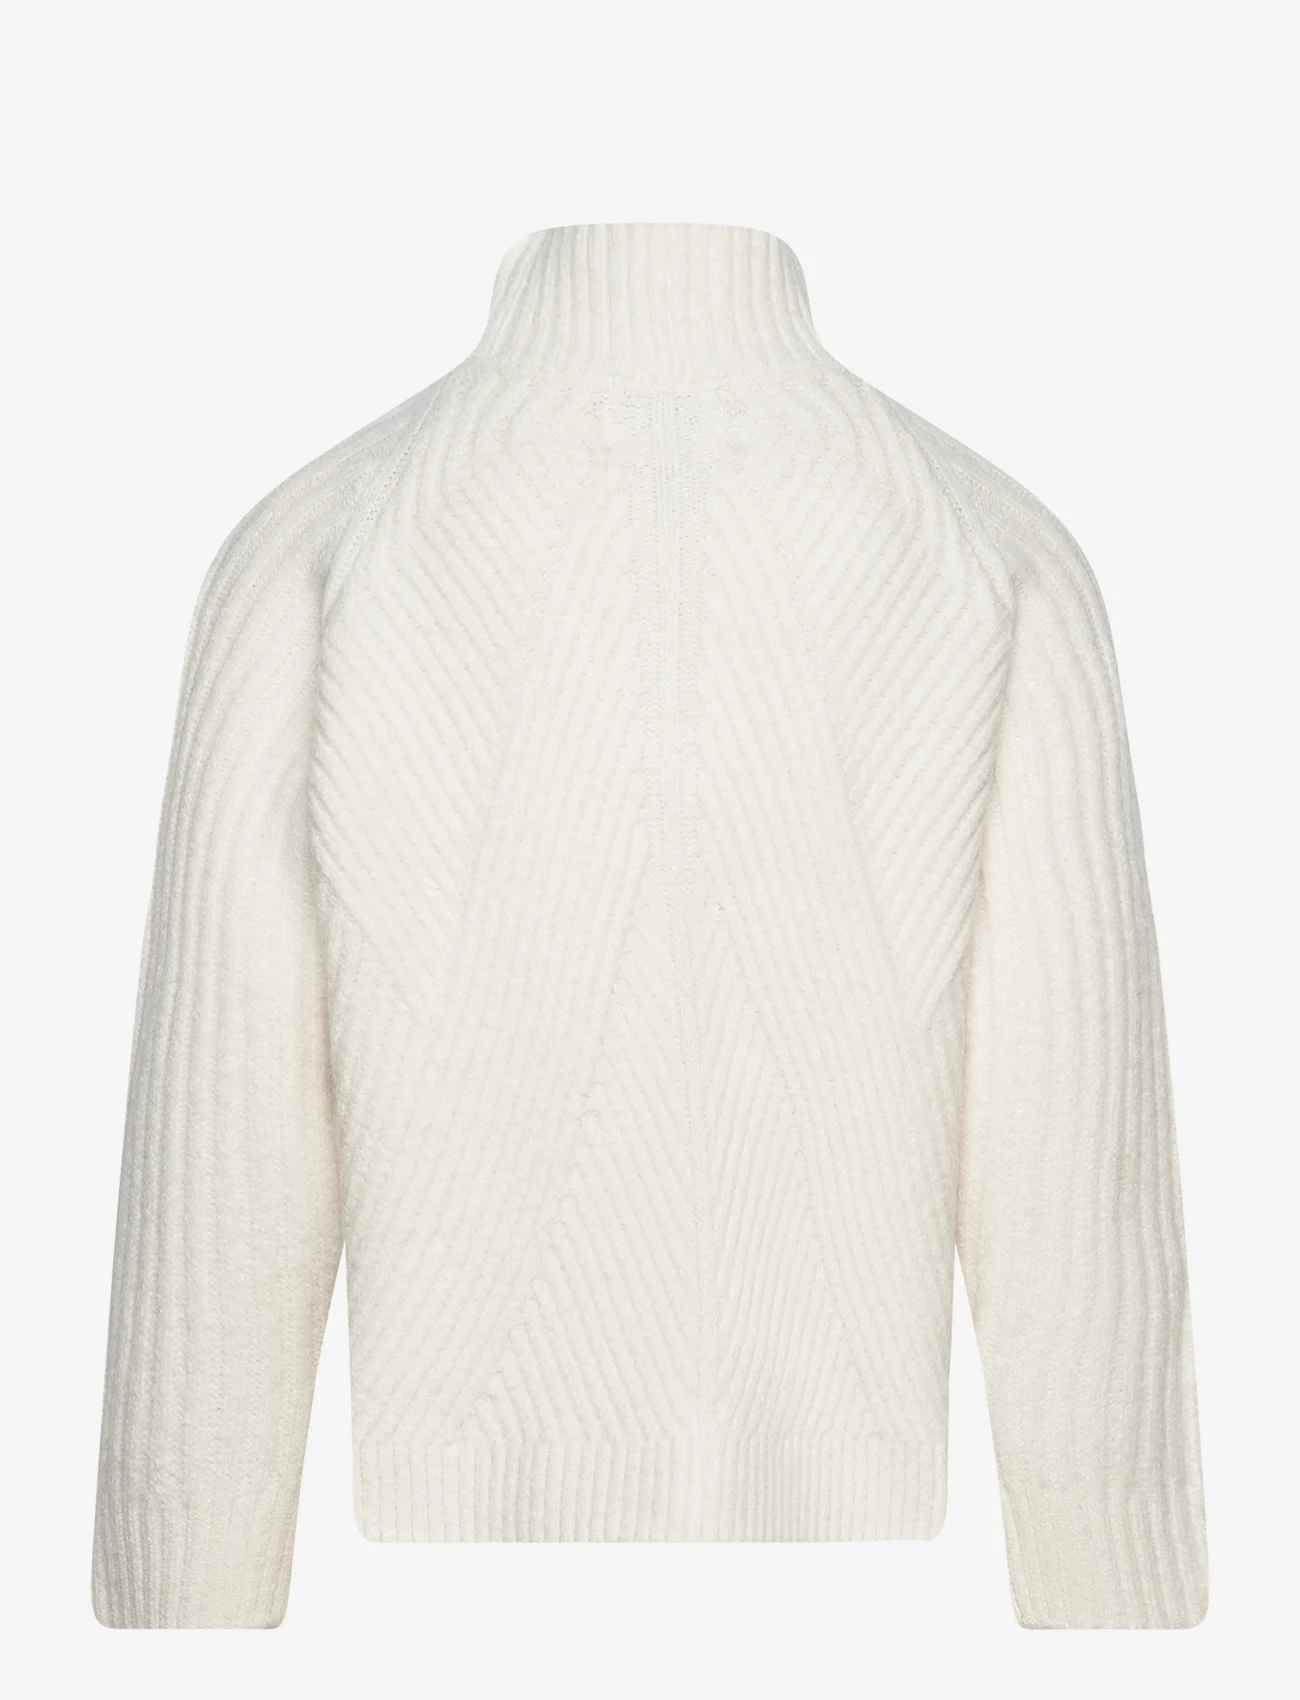 Sofie Schnoor Young - Sweater - swetry - off white - 1